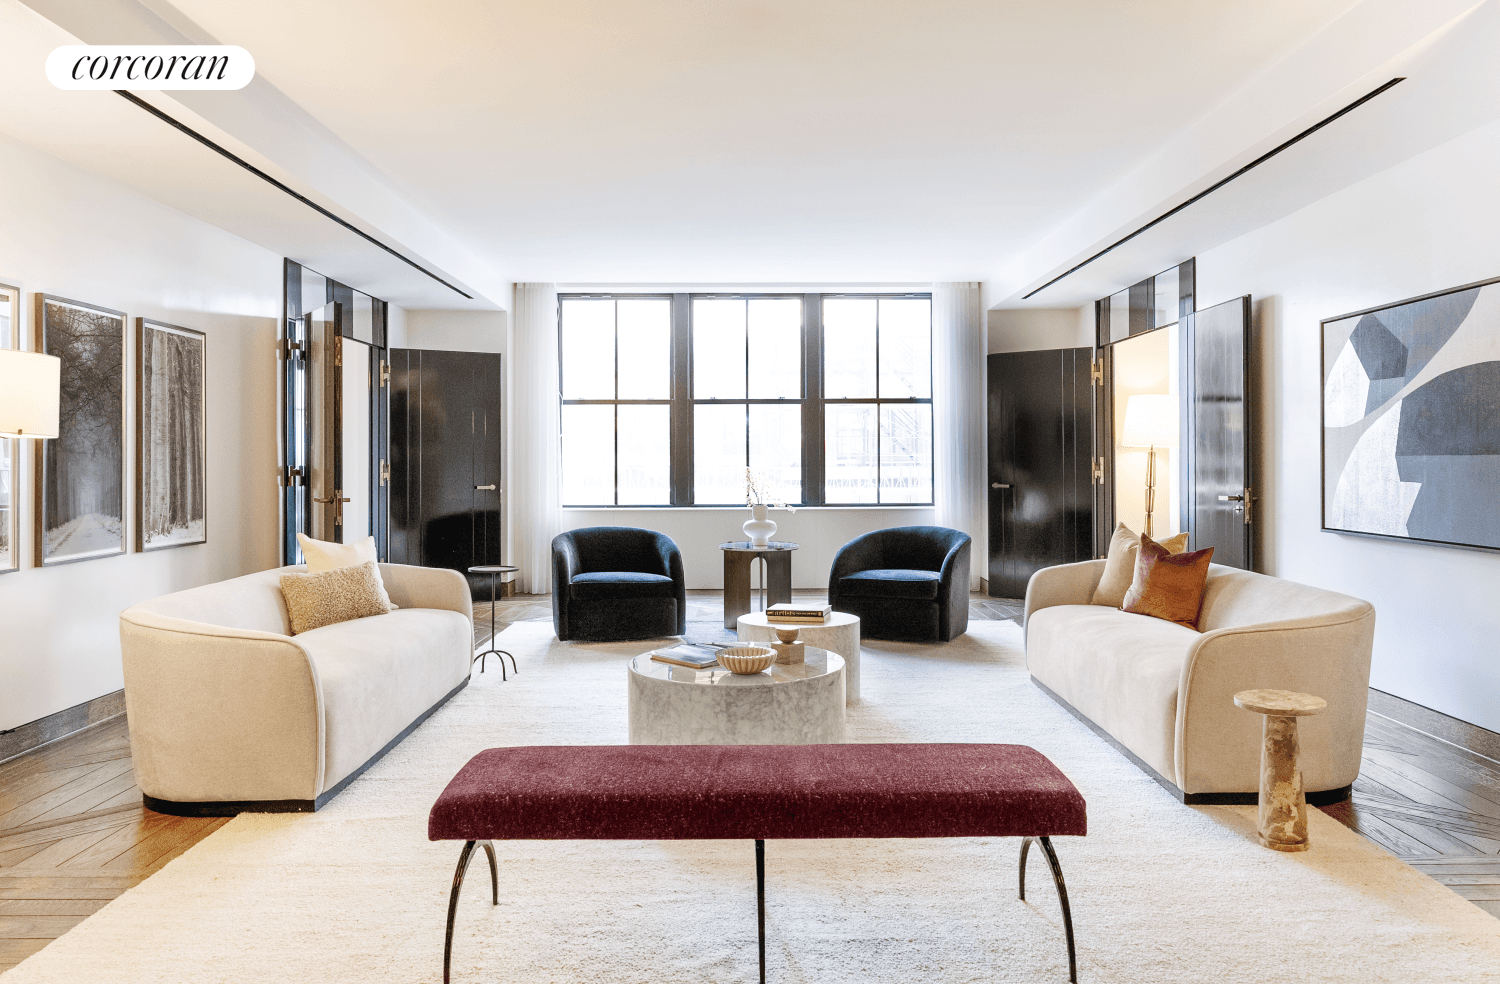 IMMEDIATE OCCUPANCYMove right in to Landmark Residence 12N at 111 West 57th Street, which provides an unparalleled opportunity for one who enjoys modern conveniences within grand spaces reminiscent of the ...